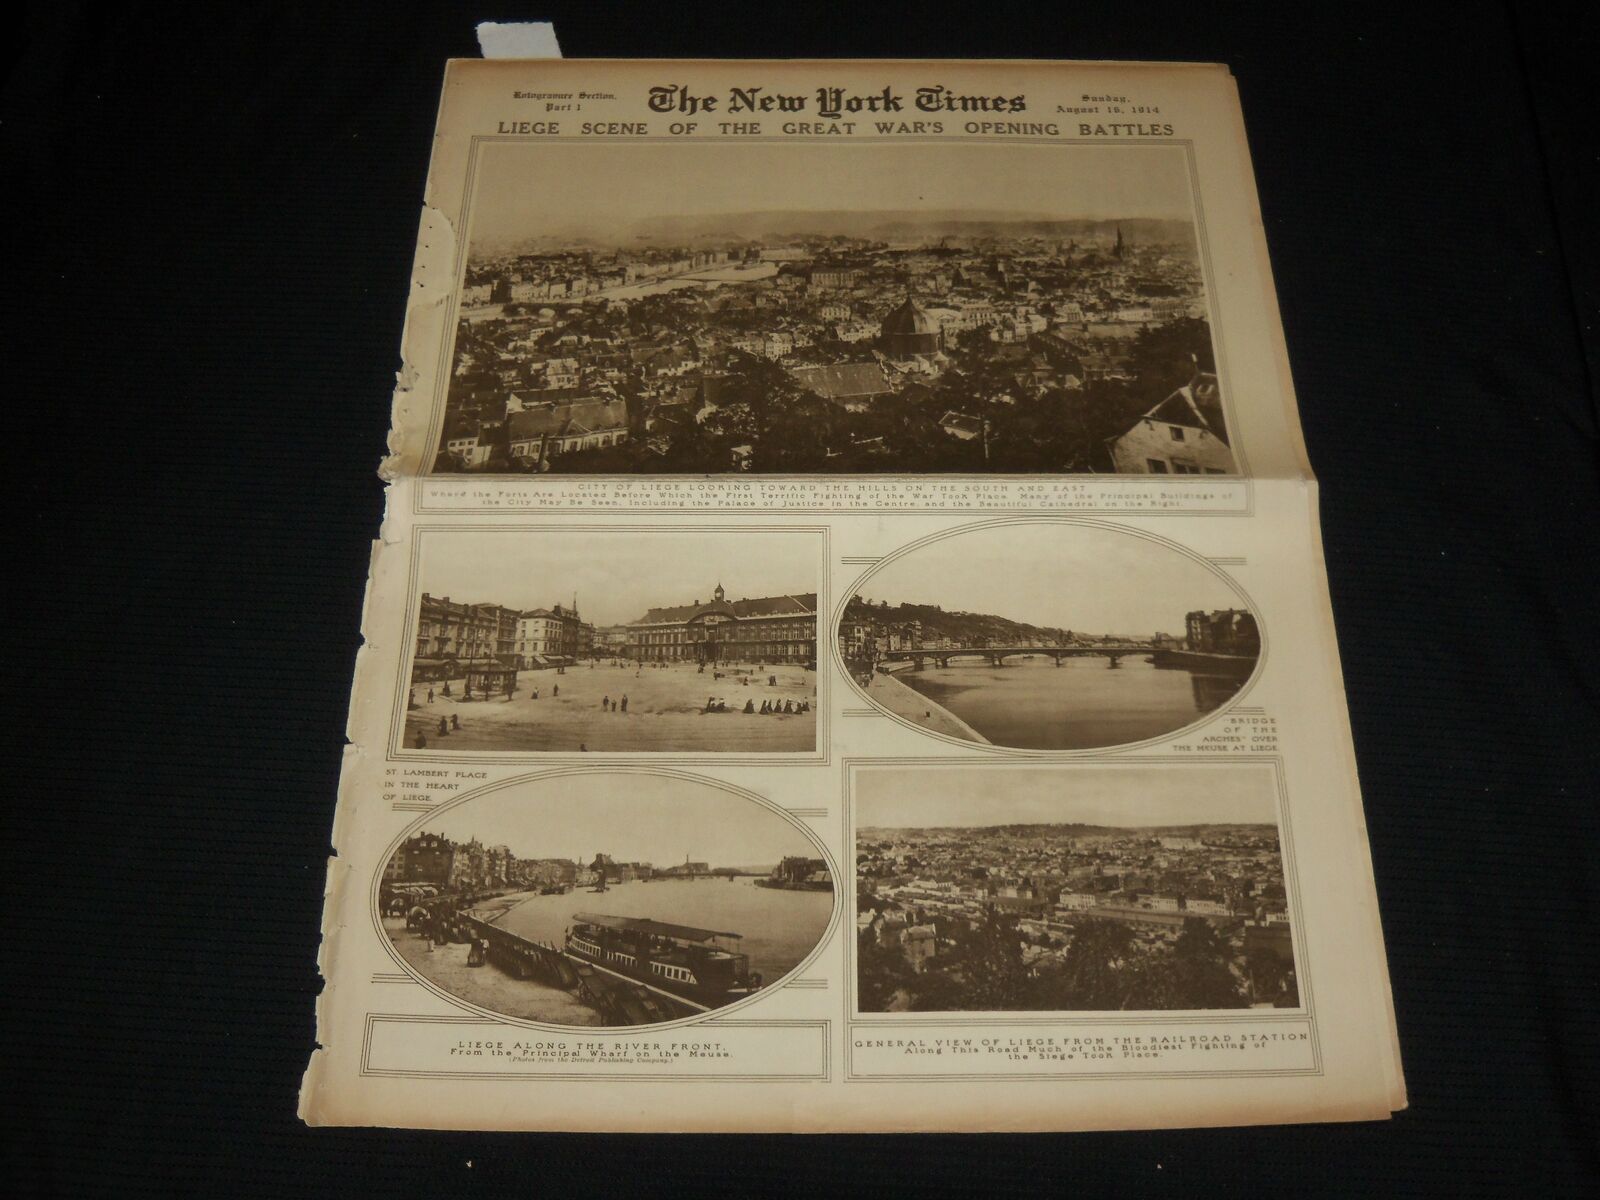 1914 AUGUST 16 NEW YORK TIMES PICTURE SECTION - NEW YORK GIANTS TEAM - NP 5606